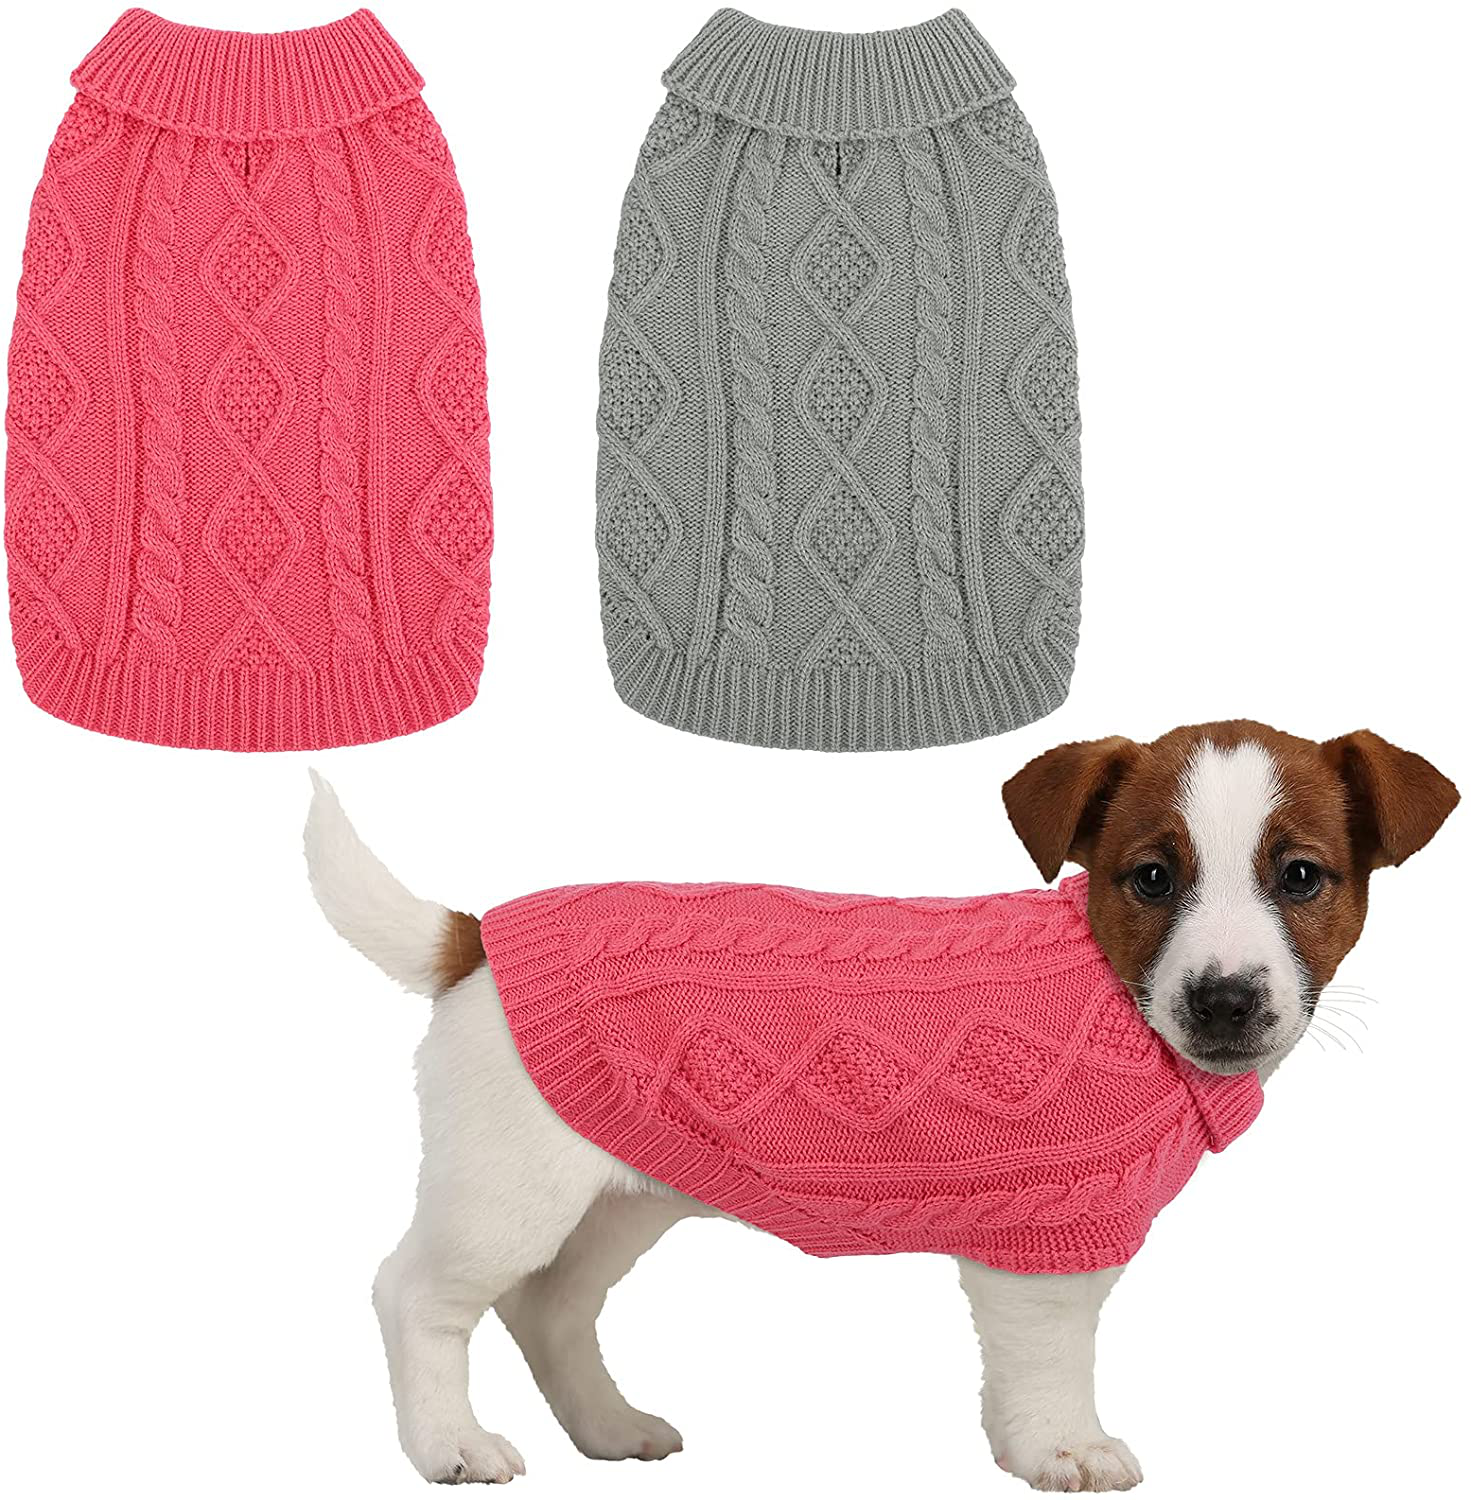 Pedgot Dog Sweater Turtleneck Knitted Dog Sweater Dog Jumper Coat Warm Pet Winter Clothes Classic Cable Knit Sweater for Dogs Cats in Cold Season